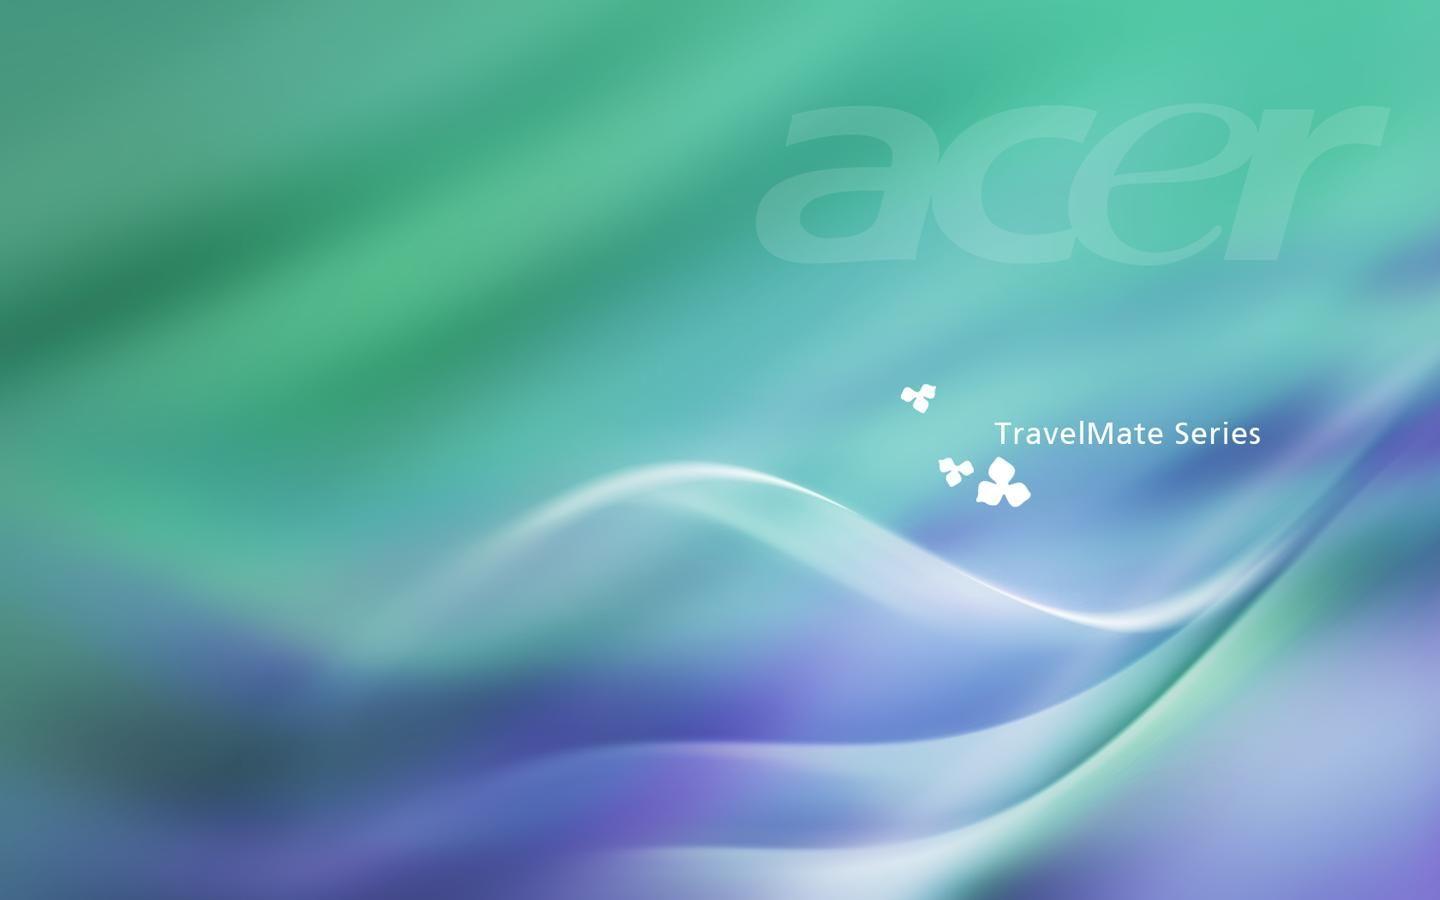 Acer TravelMate Series Acer Wallpaper. Top Quality Acer Wallpaper